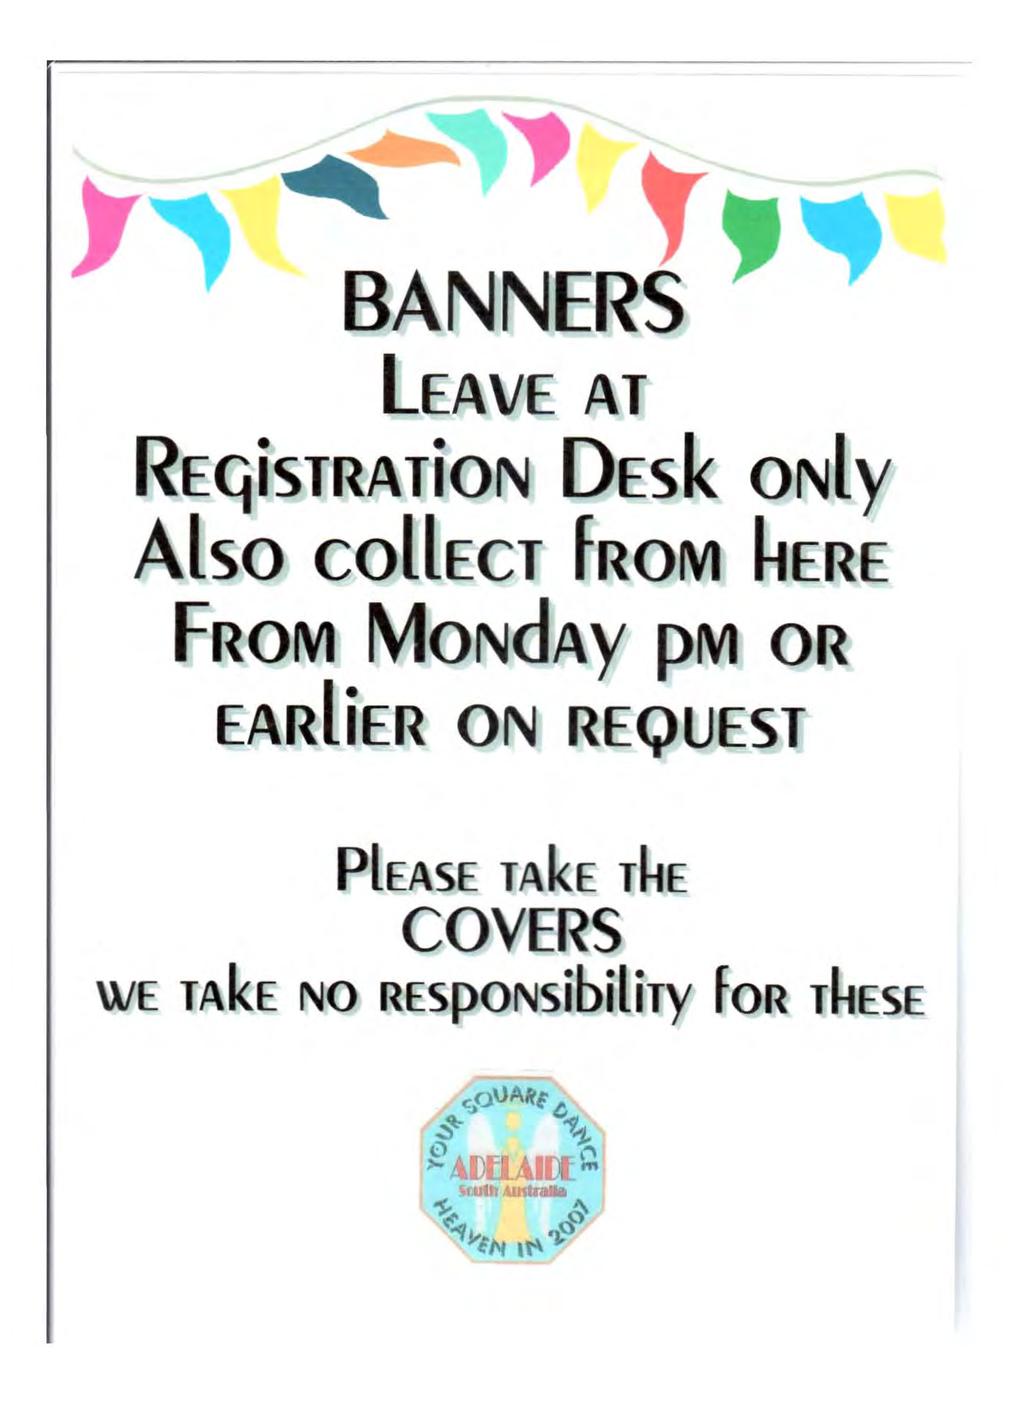 BANNERS leave AT REGisTRATioN DEsk ONt y Also COttECT FROM ~ER~ FrROM MONdAY pm